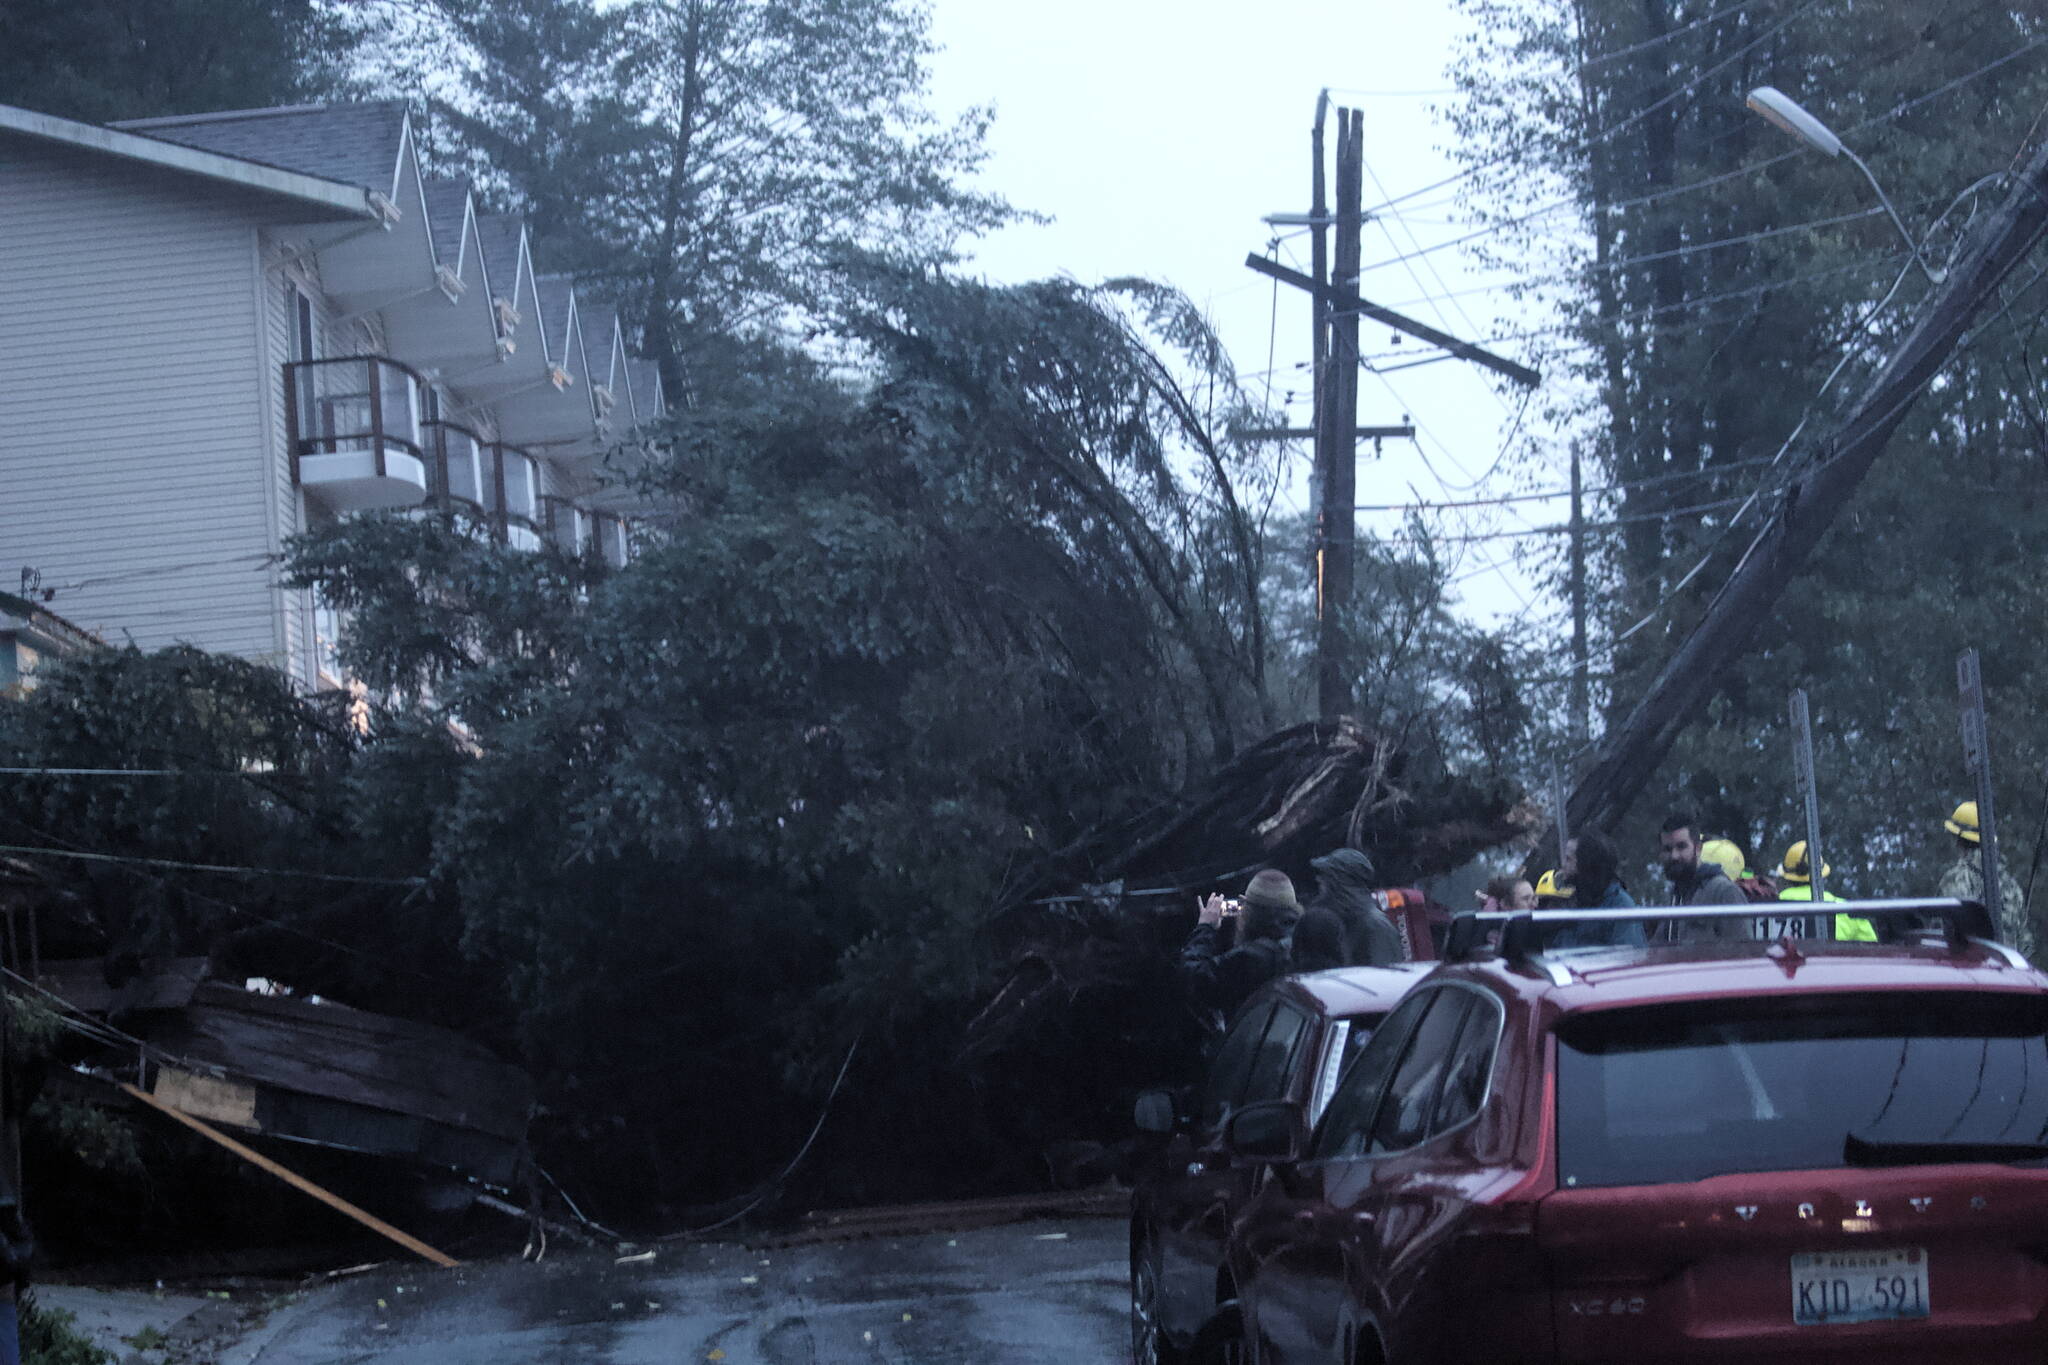 A tree lies across Gastineau Avenue on Monday evening after falling between two homes and crushing at least one vehicle. Firefighters and police closed the street to traffic, and evacuated homes along the street as well as buildings extending down to Franklin Avenue. The evacuation is expected to last at least 24 hours. (Mark Sabbatini / Juneau Empire)